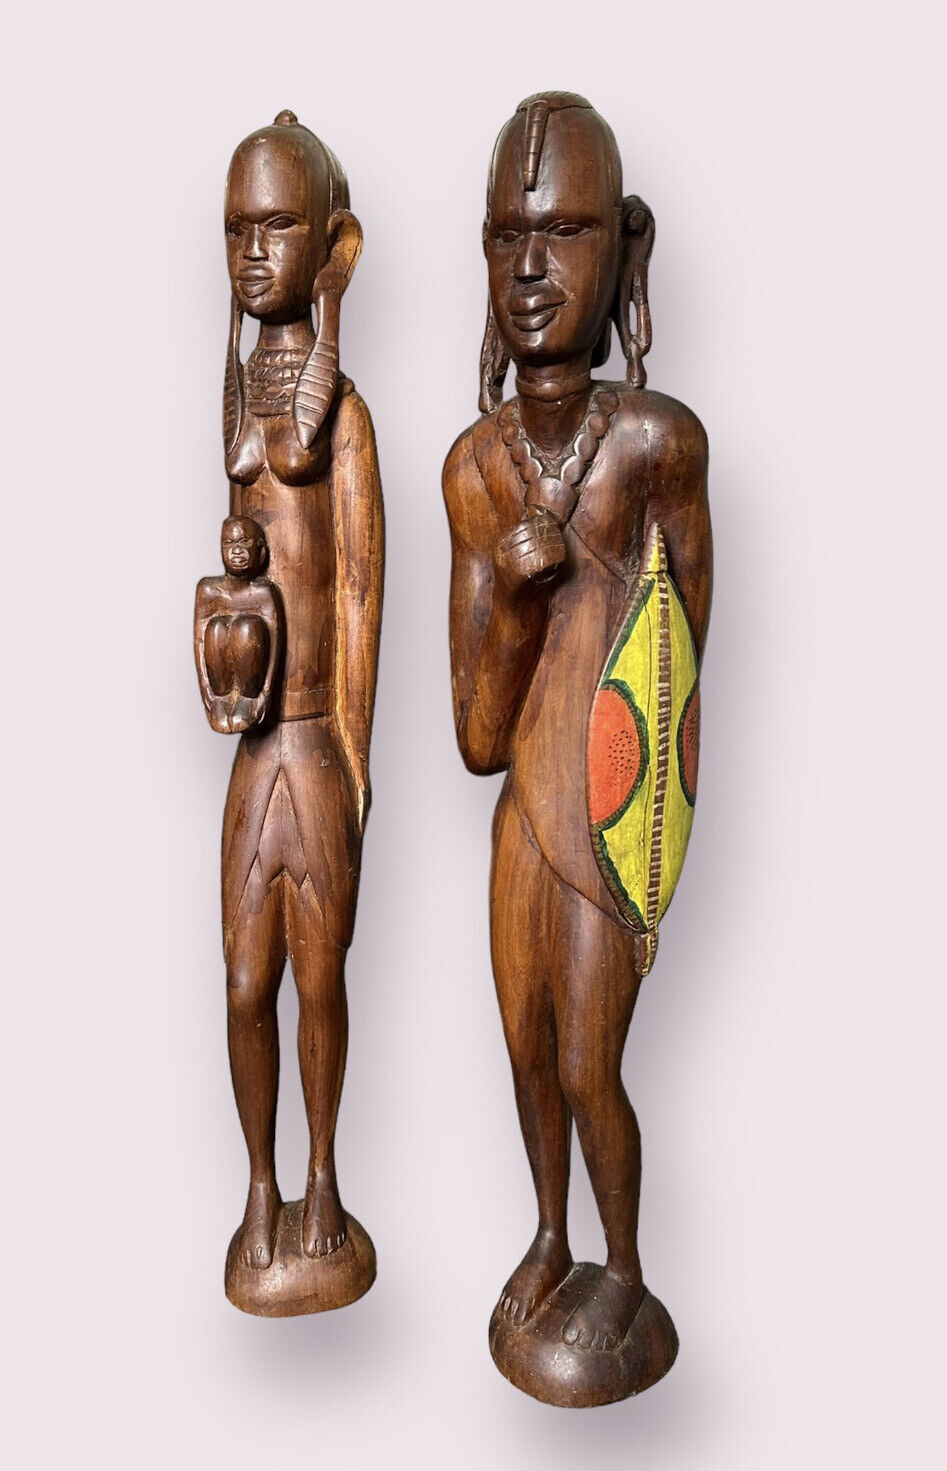 Vintage Authentic African Folk Art Masai Warrior & Wife LARGE Sculpture 28in”